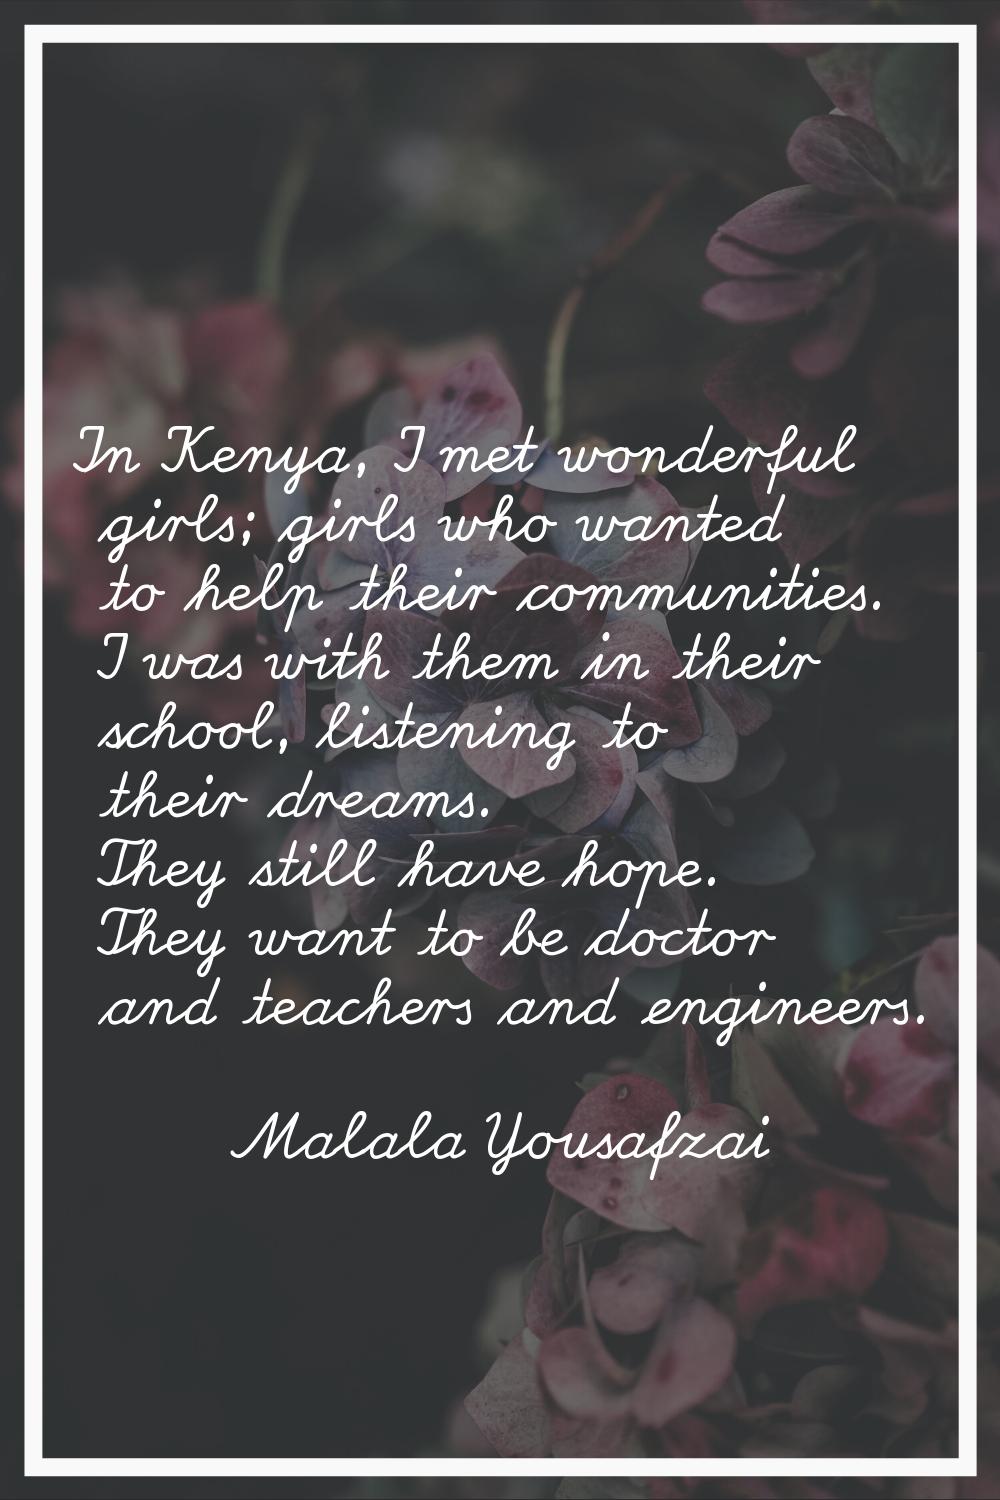 In Kenya, I met wonderful girls; girls who wanted to help their communities. I was with them in the